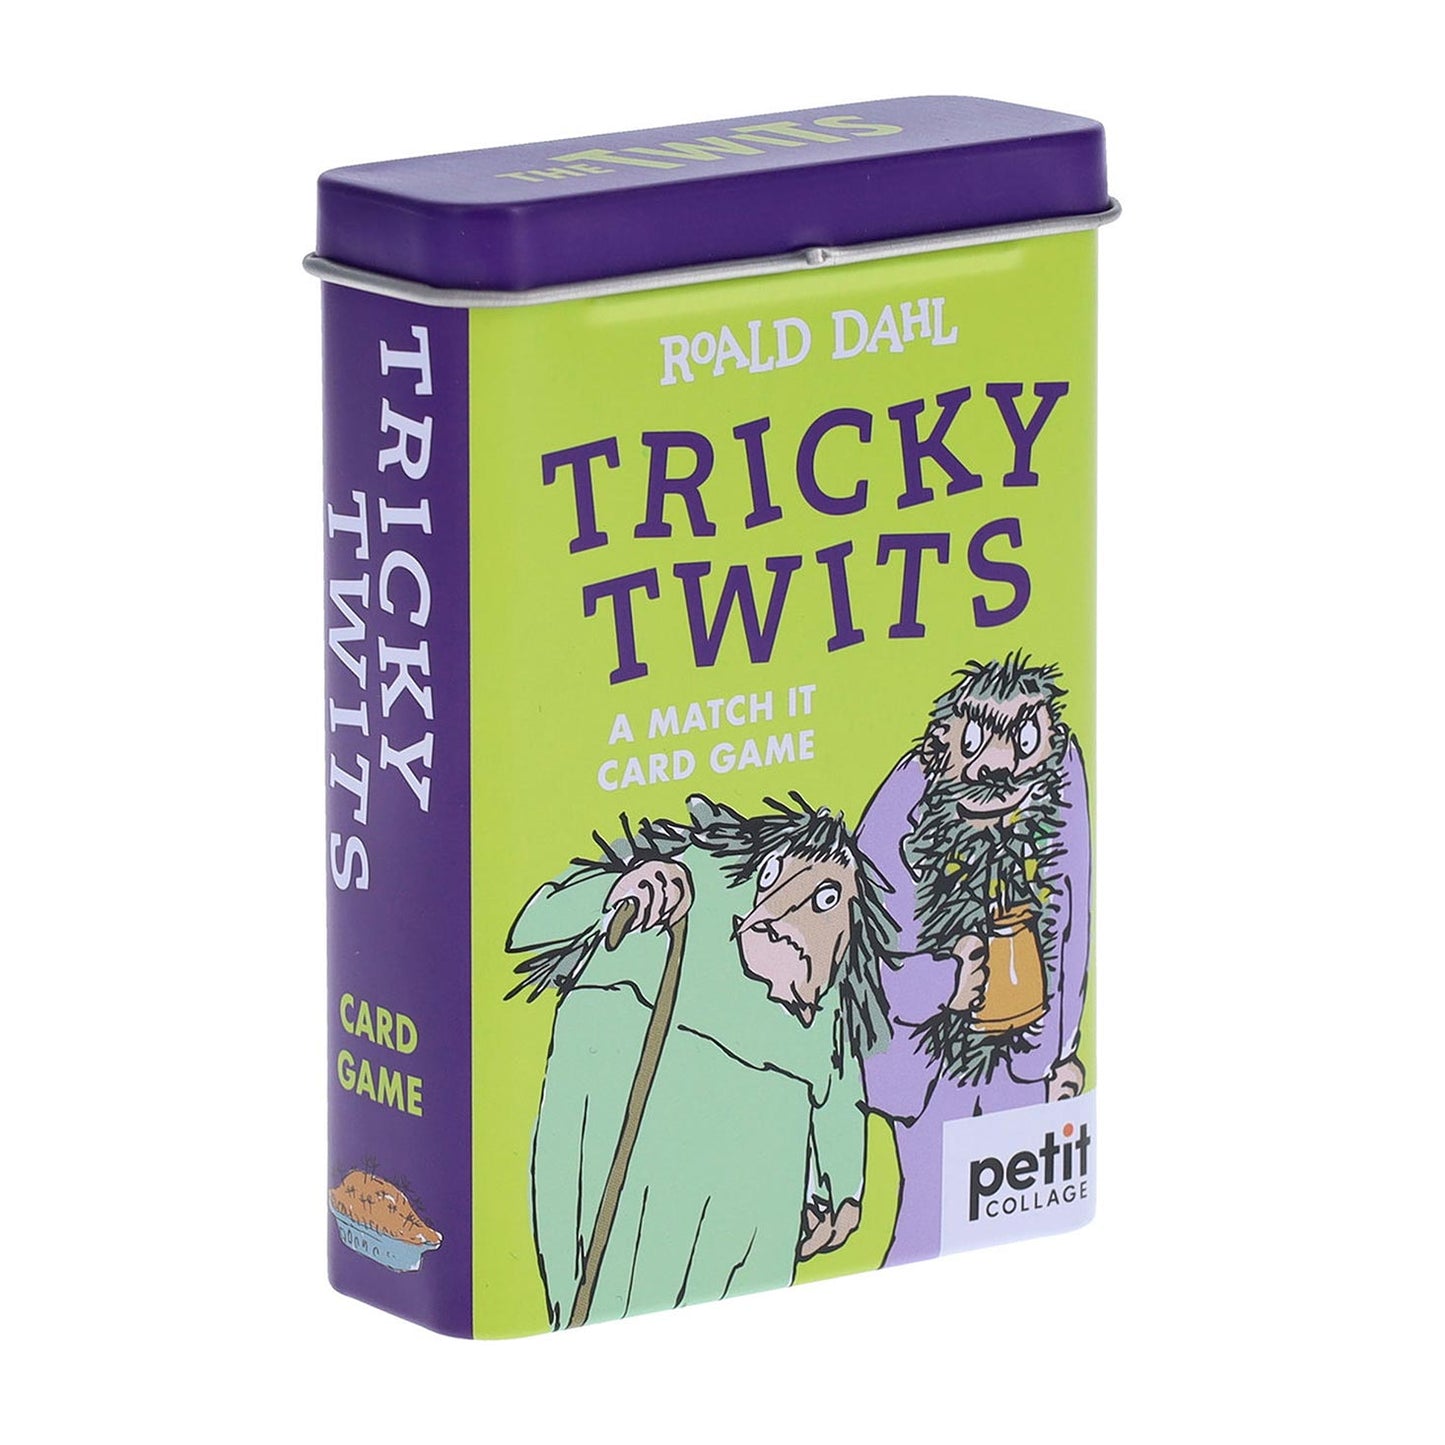 Tricky Twits card game based on Roald Dahl's The Twits with illustrations from Quentin Blake